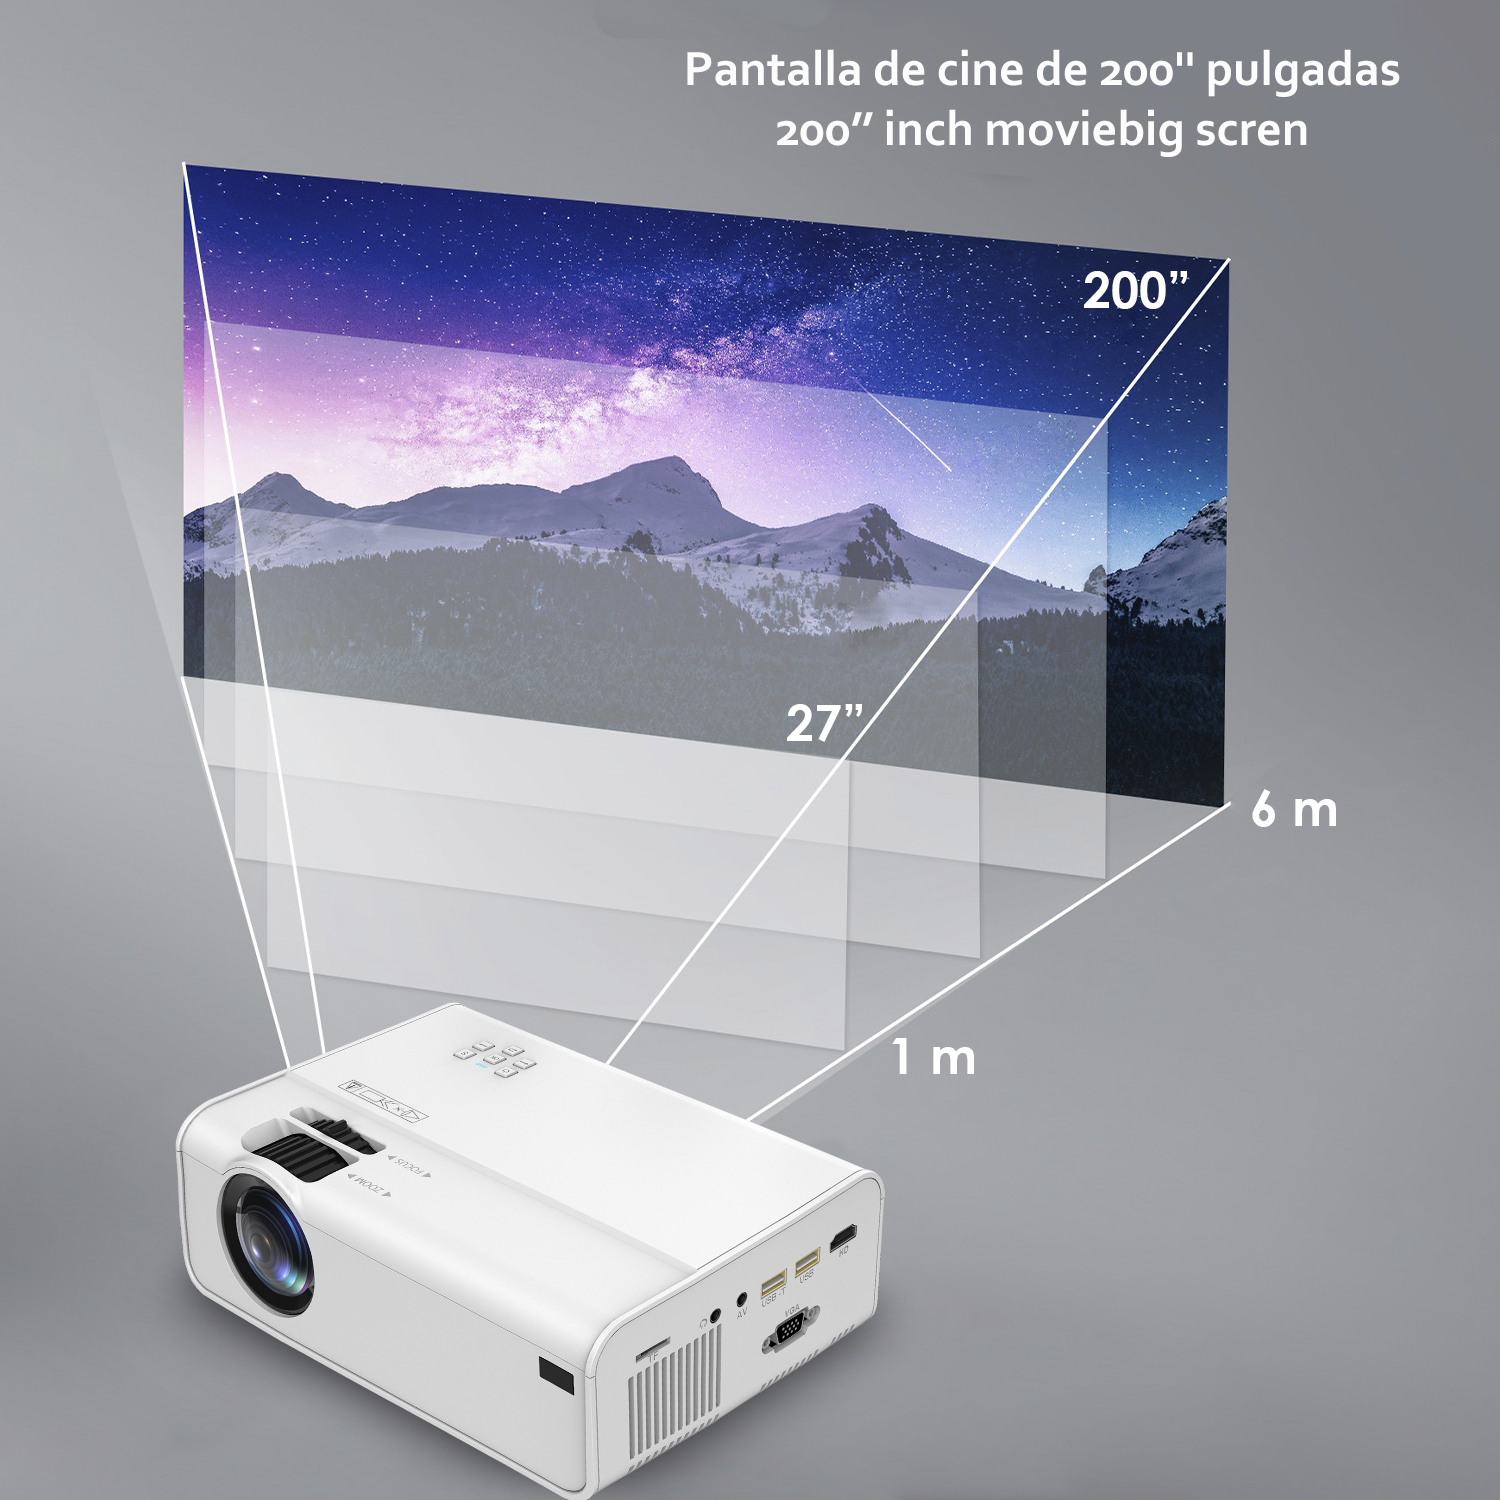 Video proyector LED T500 Wifi, con Airplay y Miracast. Soporta